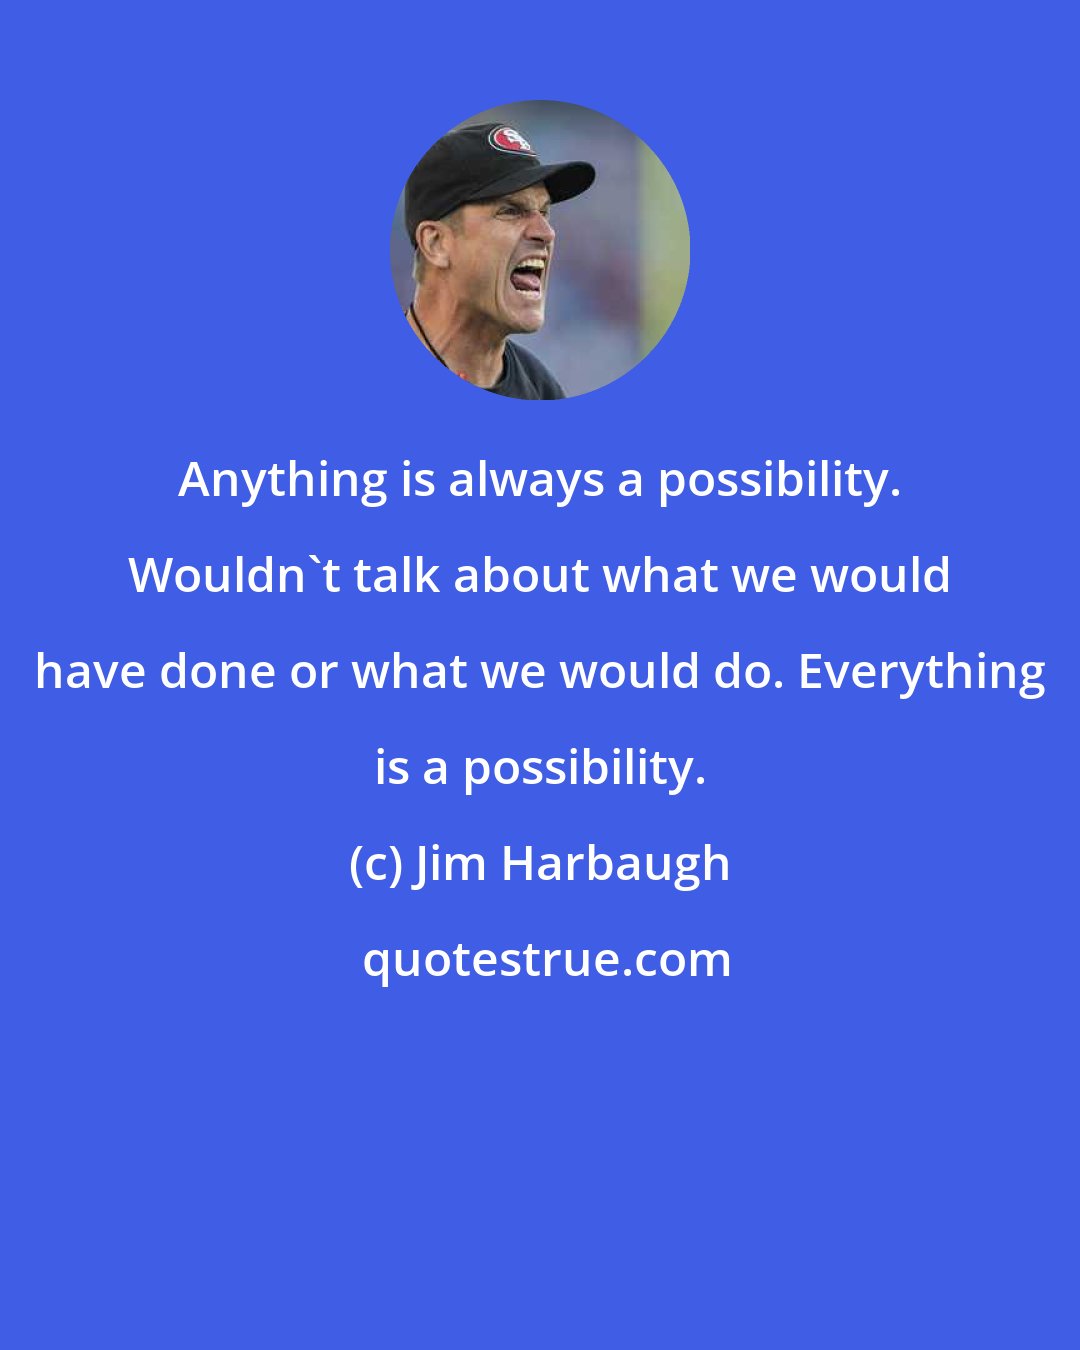 Jim Harbaugh: Anything is always a possibility. Wouldn't talk about what we would have done or what we would do. Everything is a possibility.